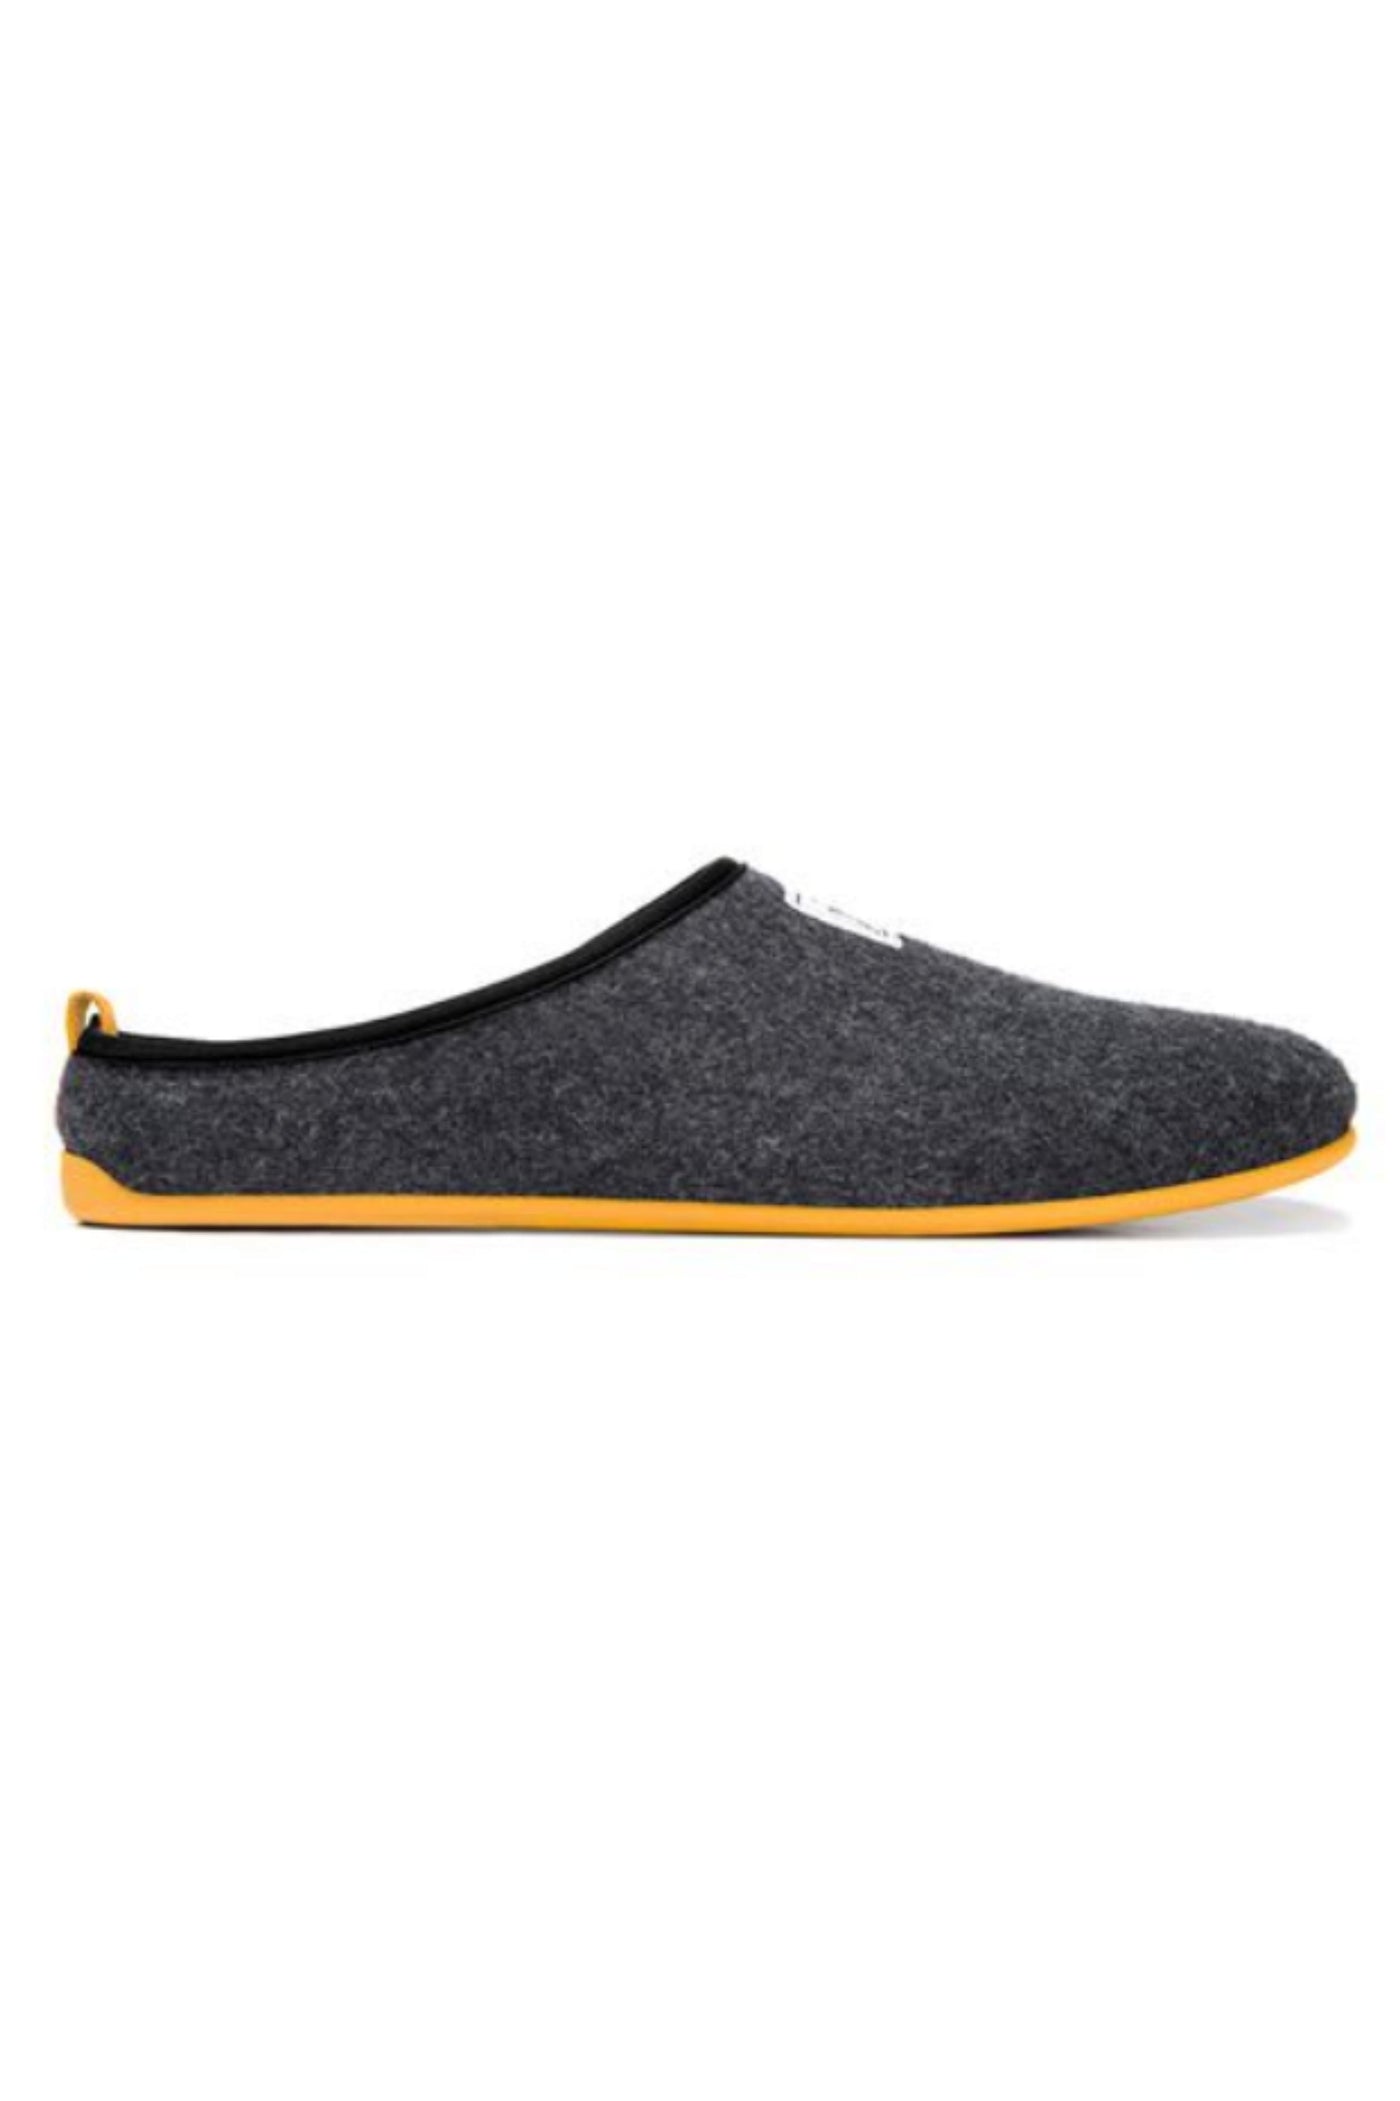 Mercredy Black & Yellow Slippers-Mens-Ohh! By Gum - Shop Sustainable